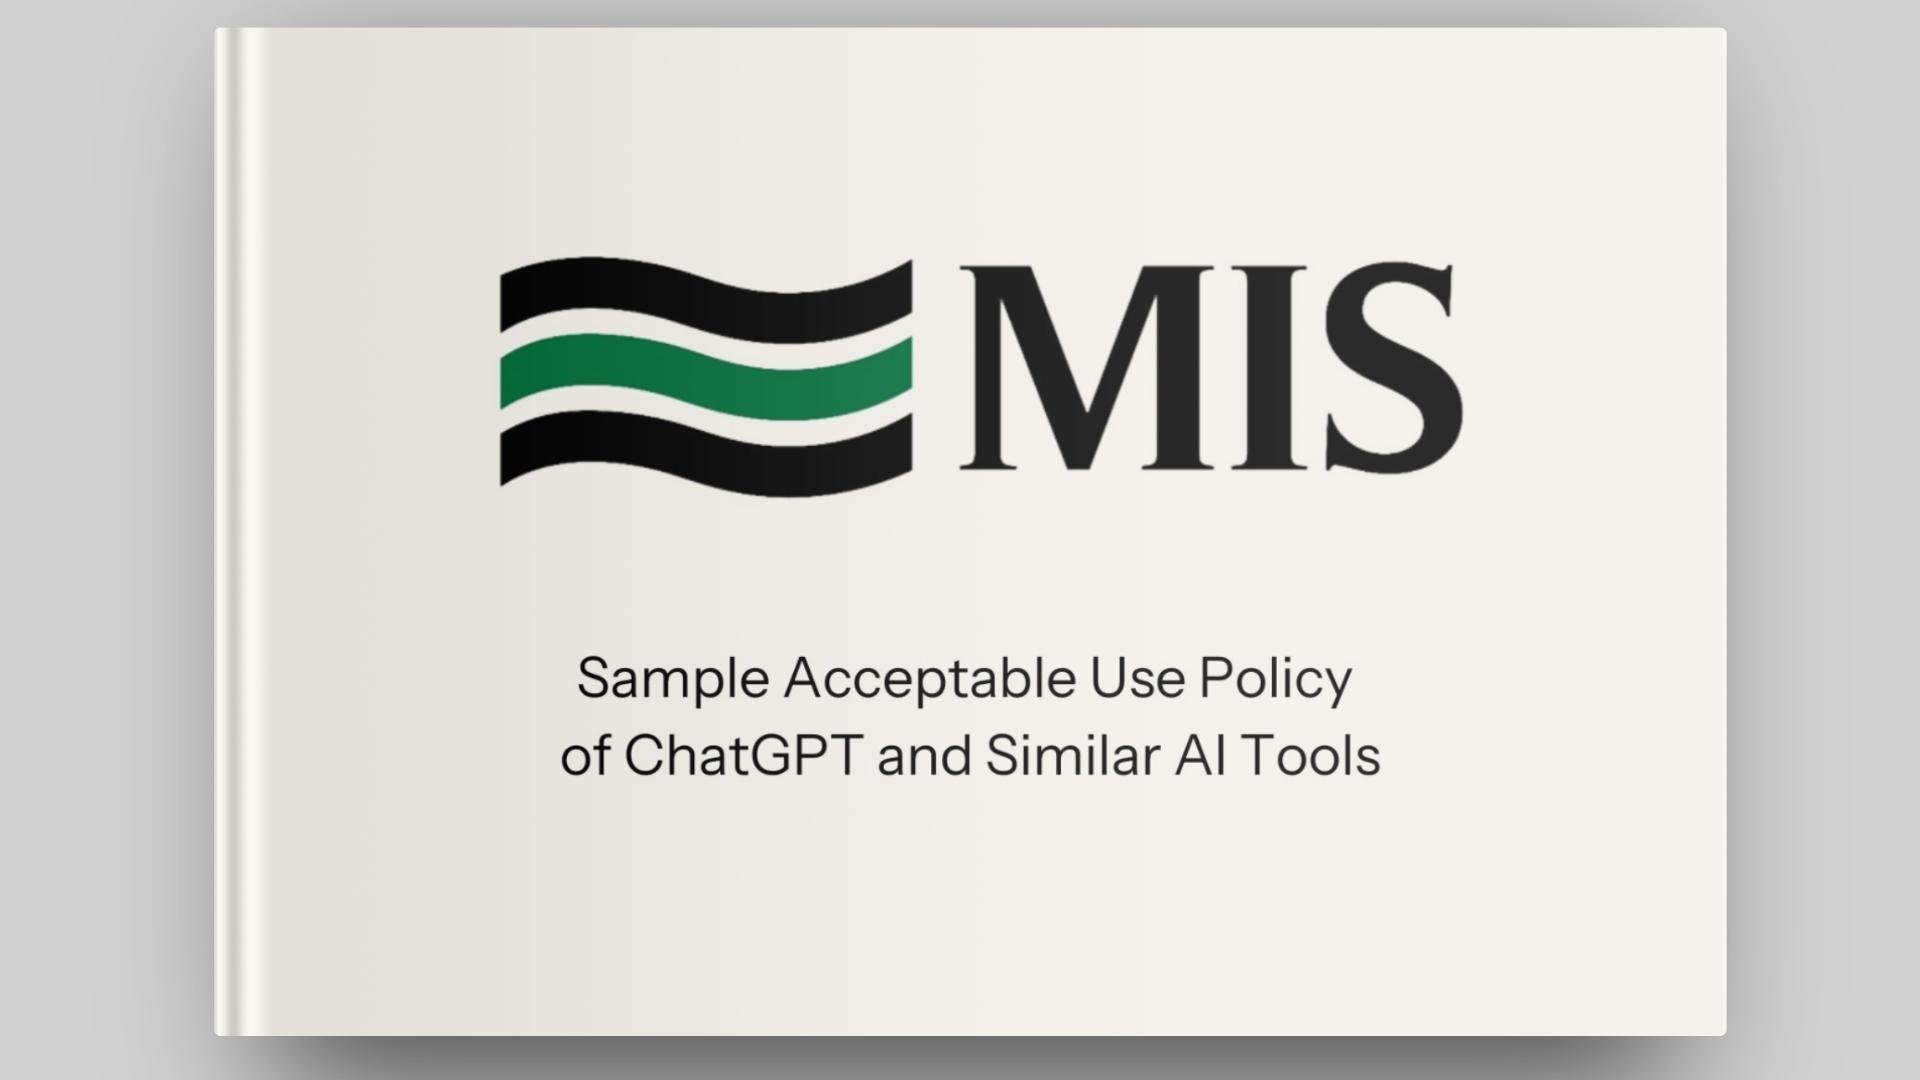 Sample Acceptable Use Policy